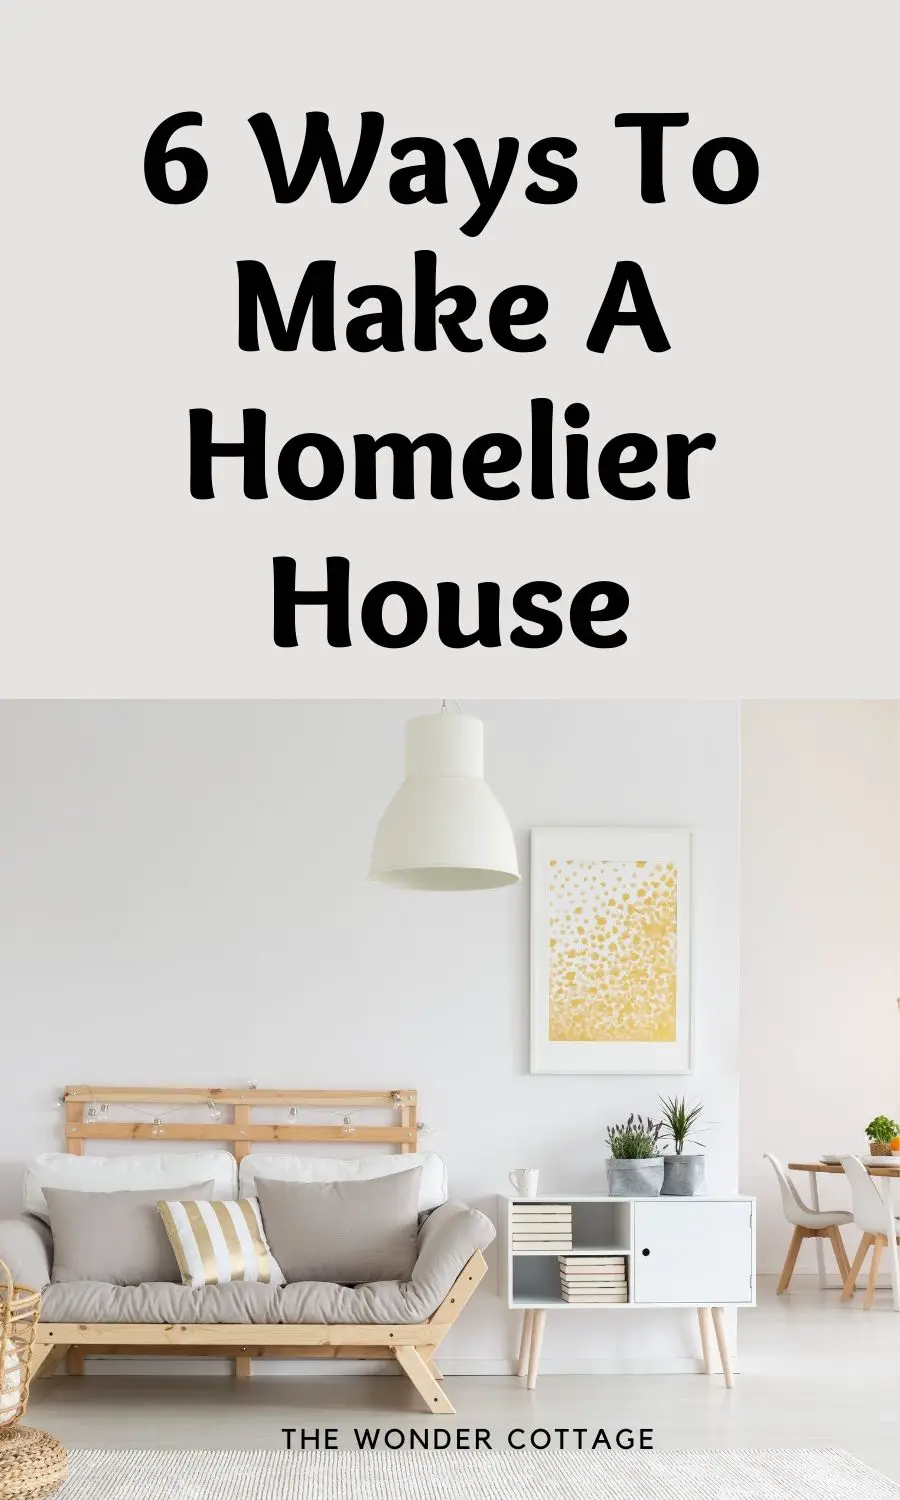 6 ways to make a homelier house